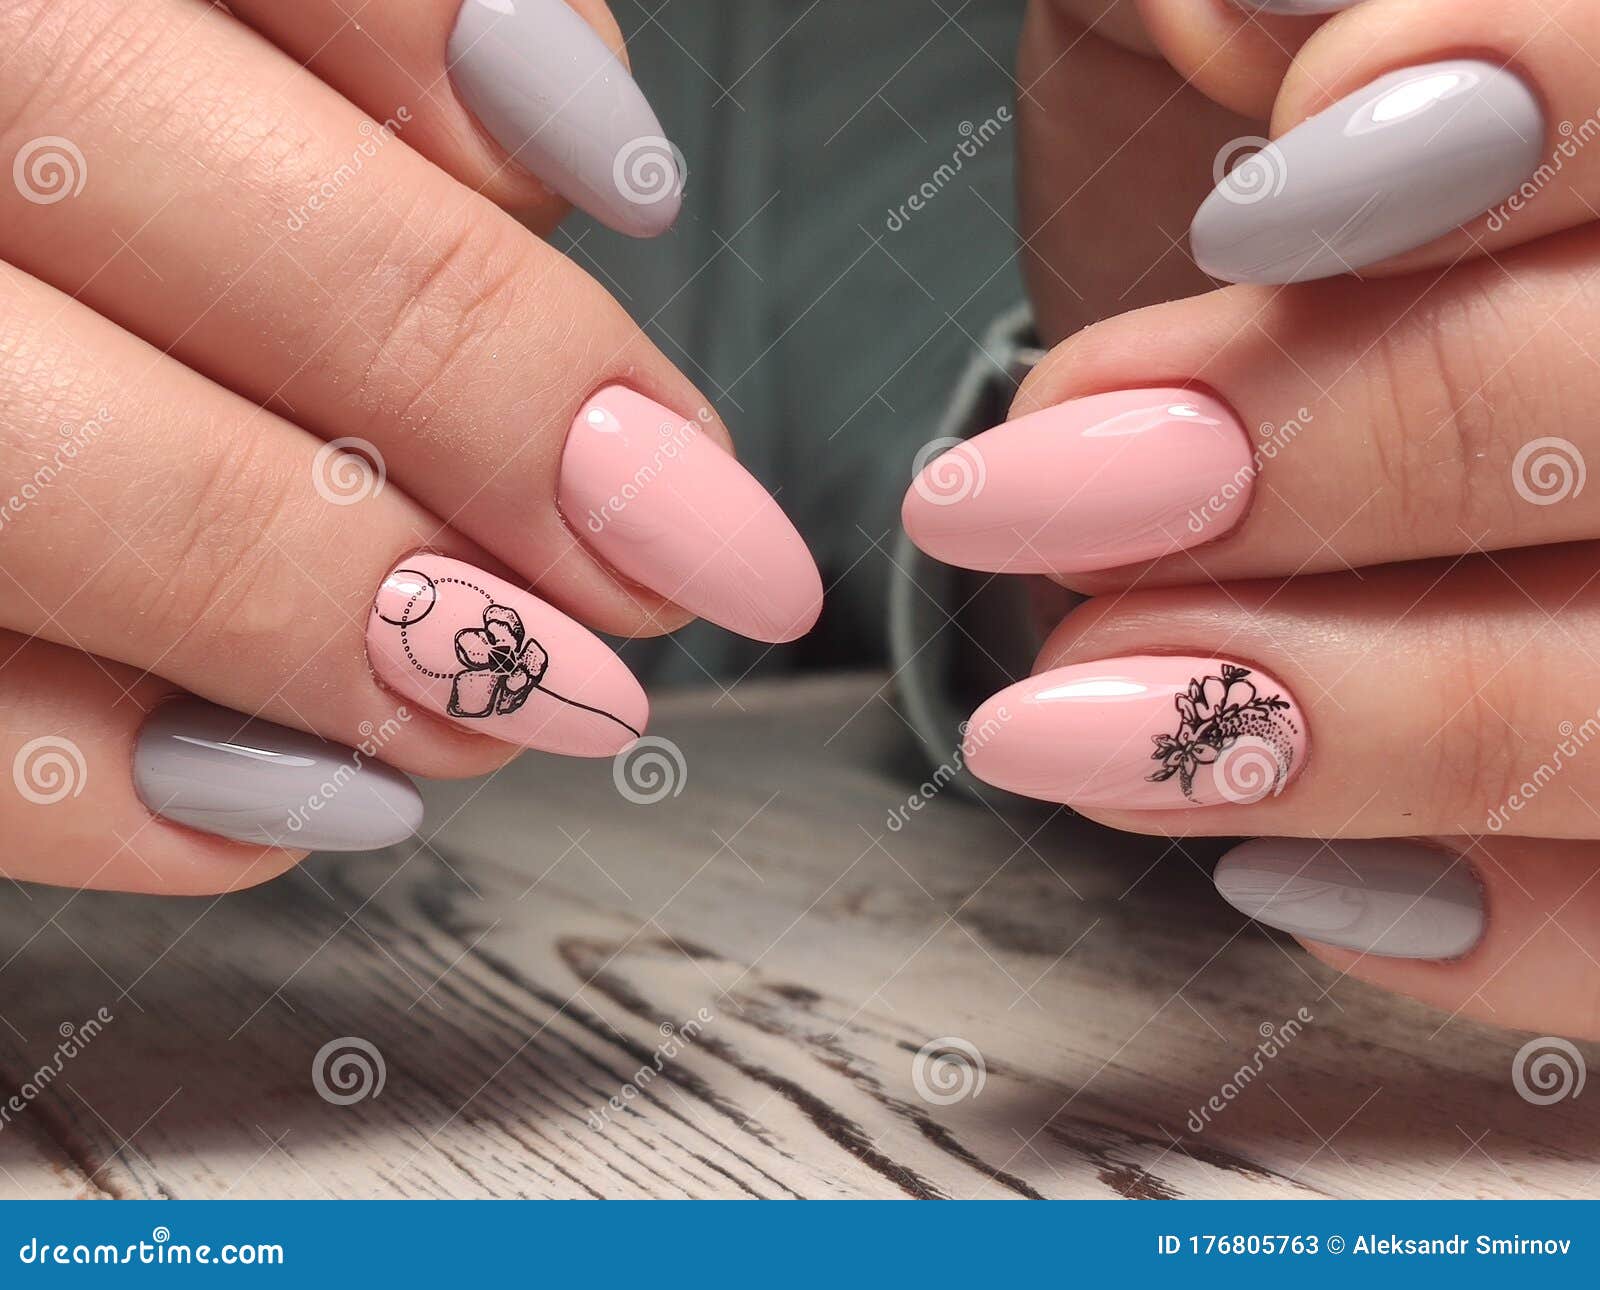 Buy Secret Lives long designer artificial nails extension light pink &  black combo with silver pearls 3D bow fake nails design 24 pieces set with  manicure kit convenient than manicure Online at